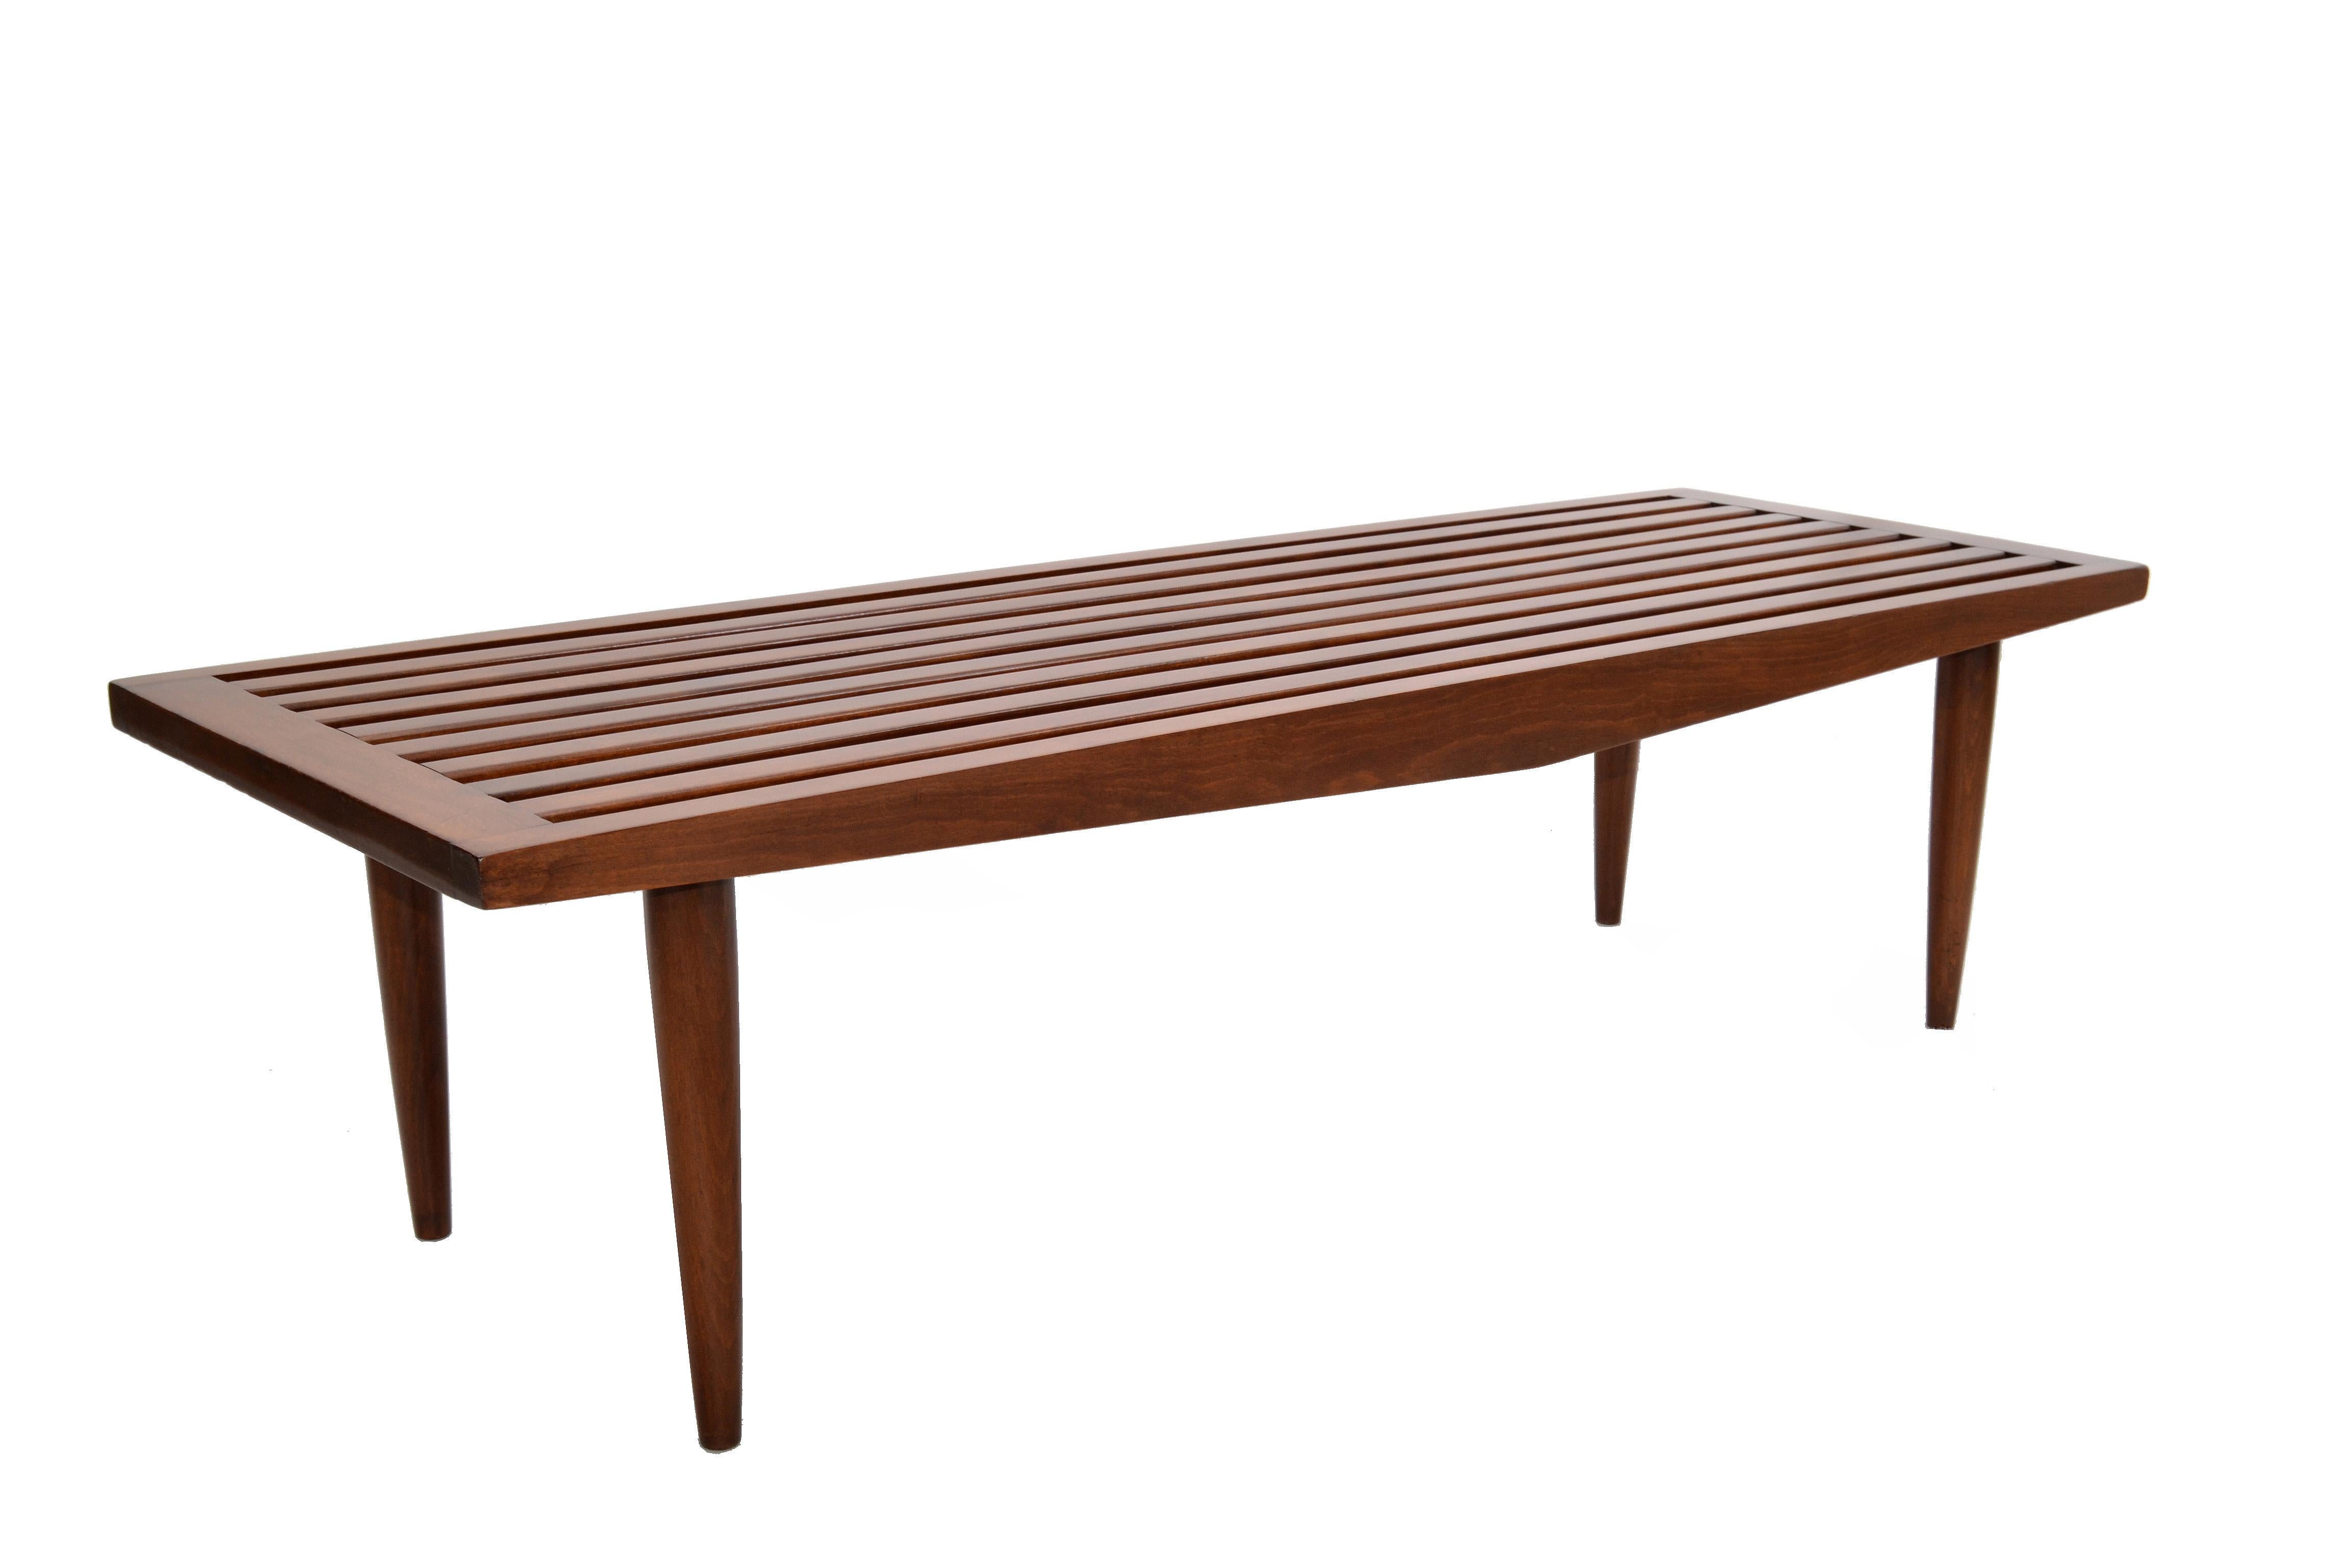 Classic Mid-Century Modern slat bench made out of oakwood on tapered legs.
Marked underneath, Yugoslavia.
Restored and ready for a new Home.